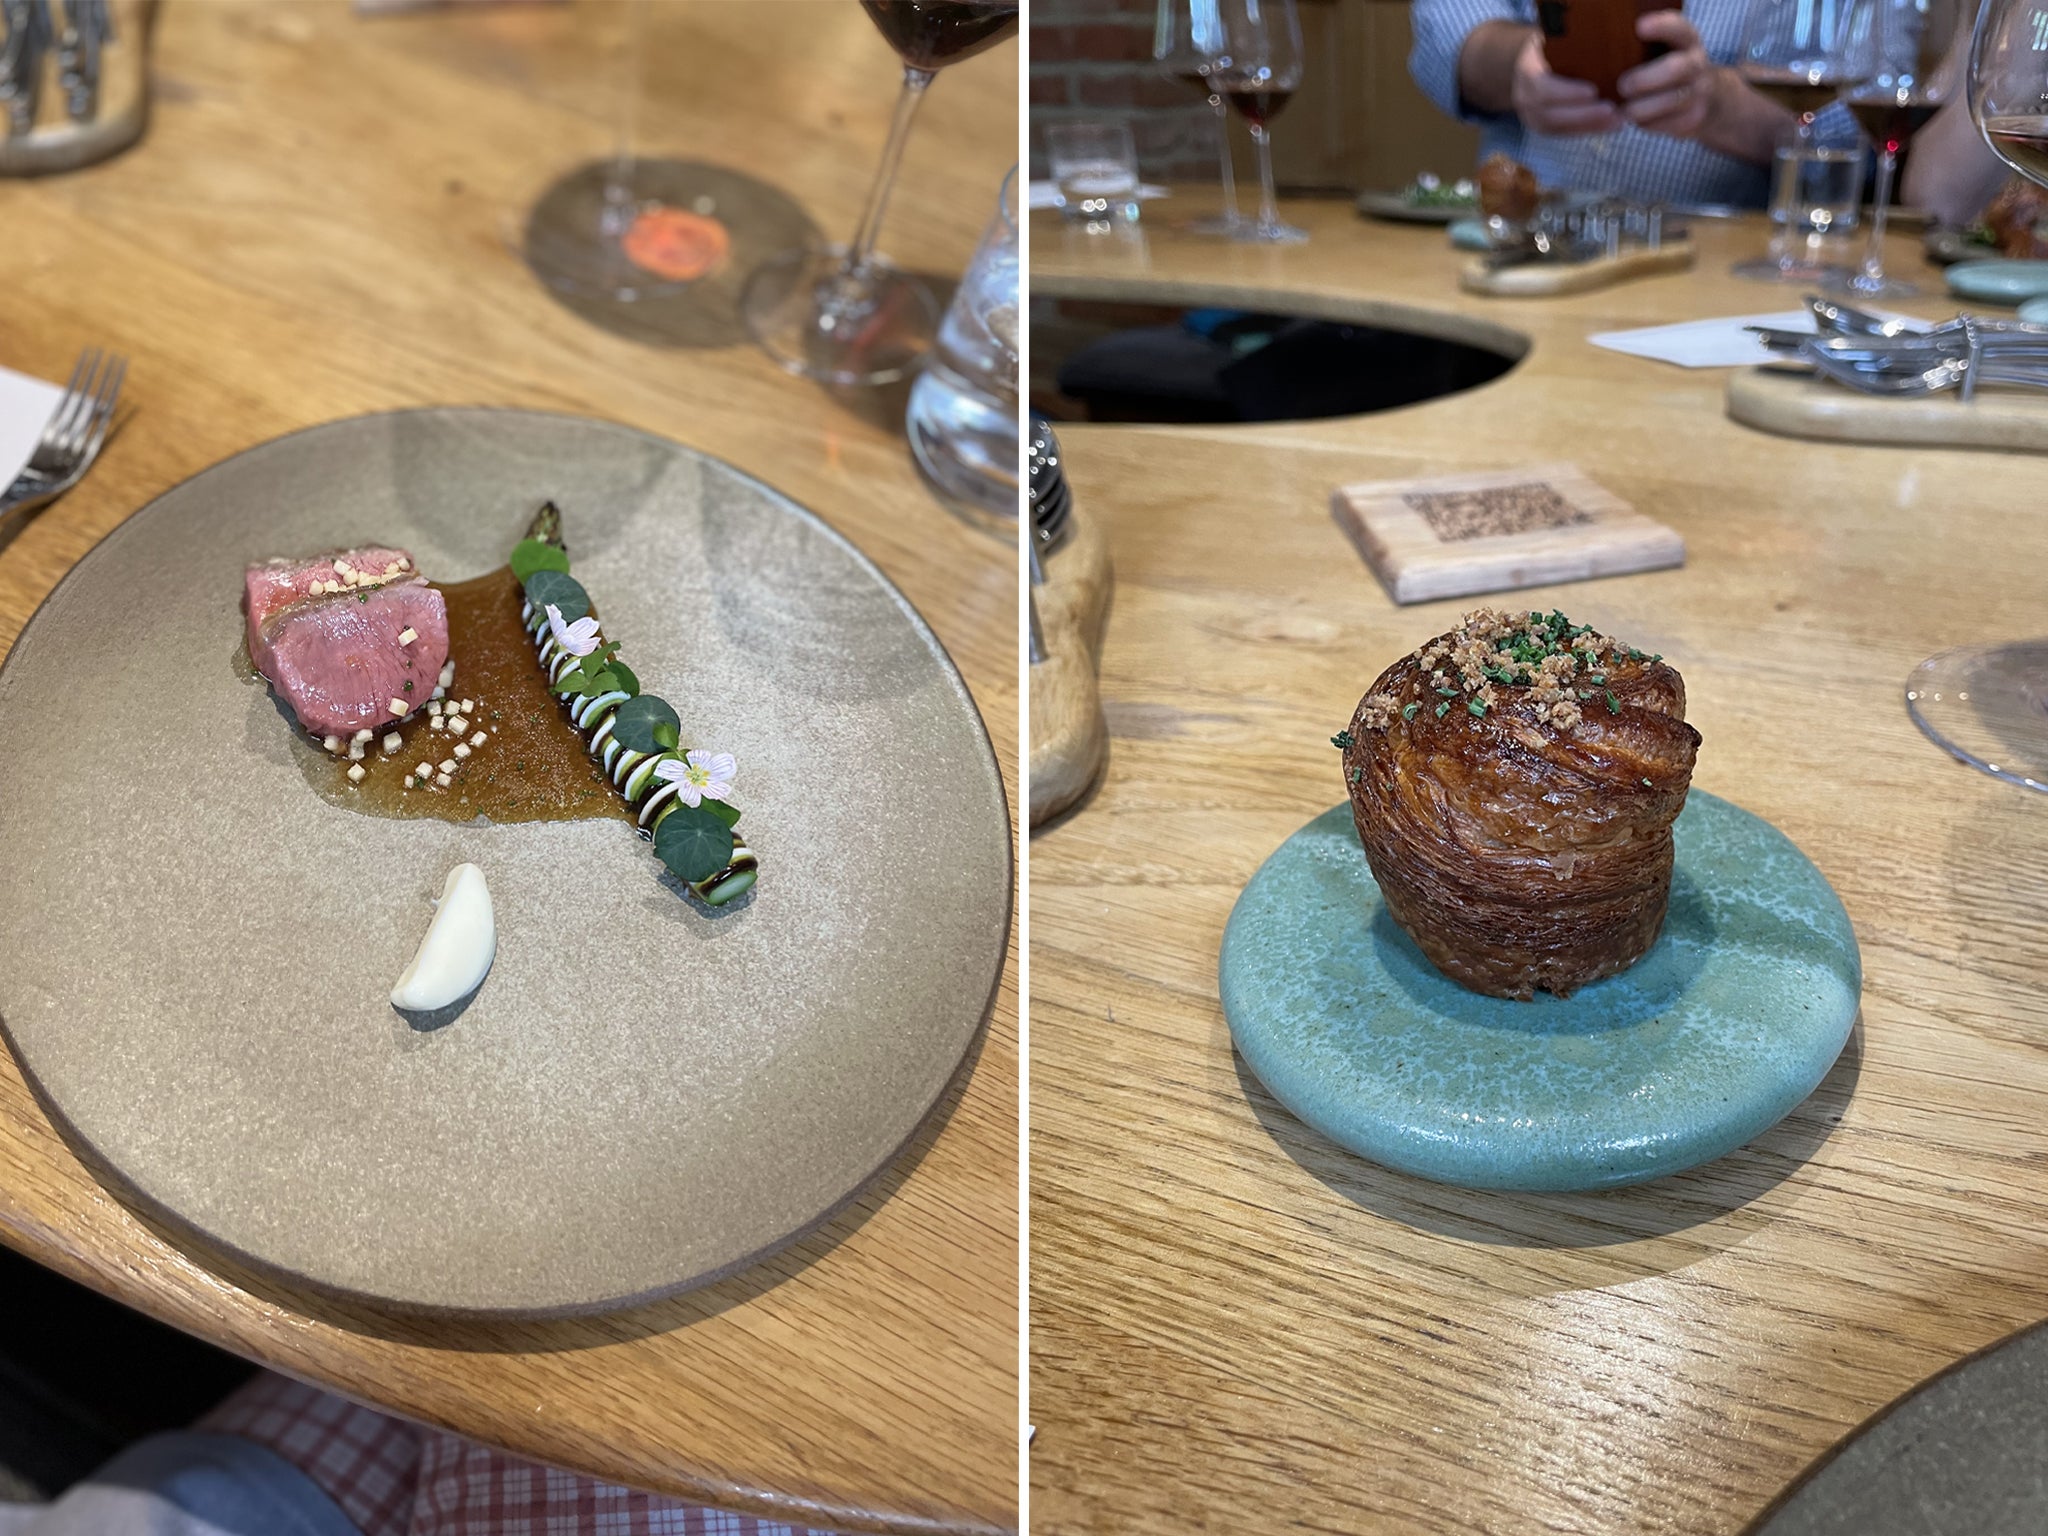 The lamb course: served with the most artistic asparagus you’ve ever seen and the glorious lamb neck cruffin